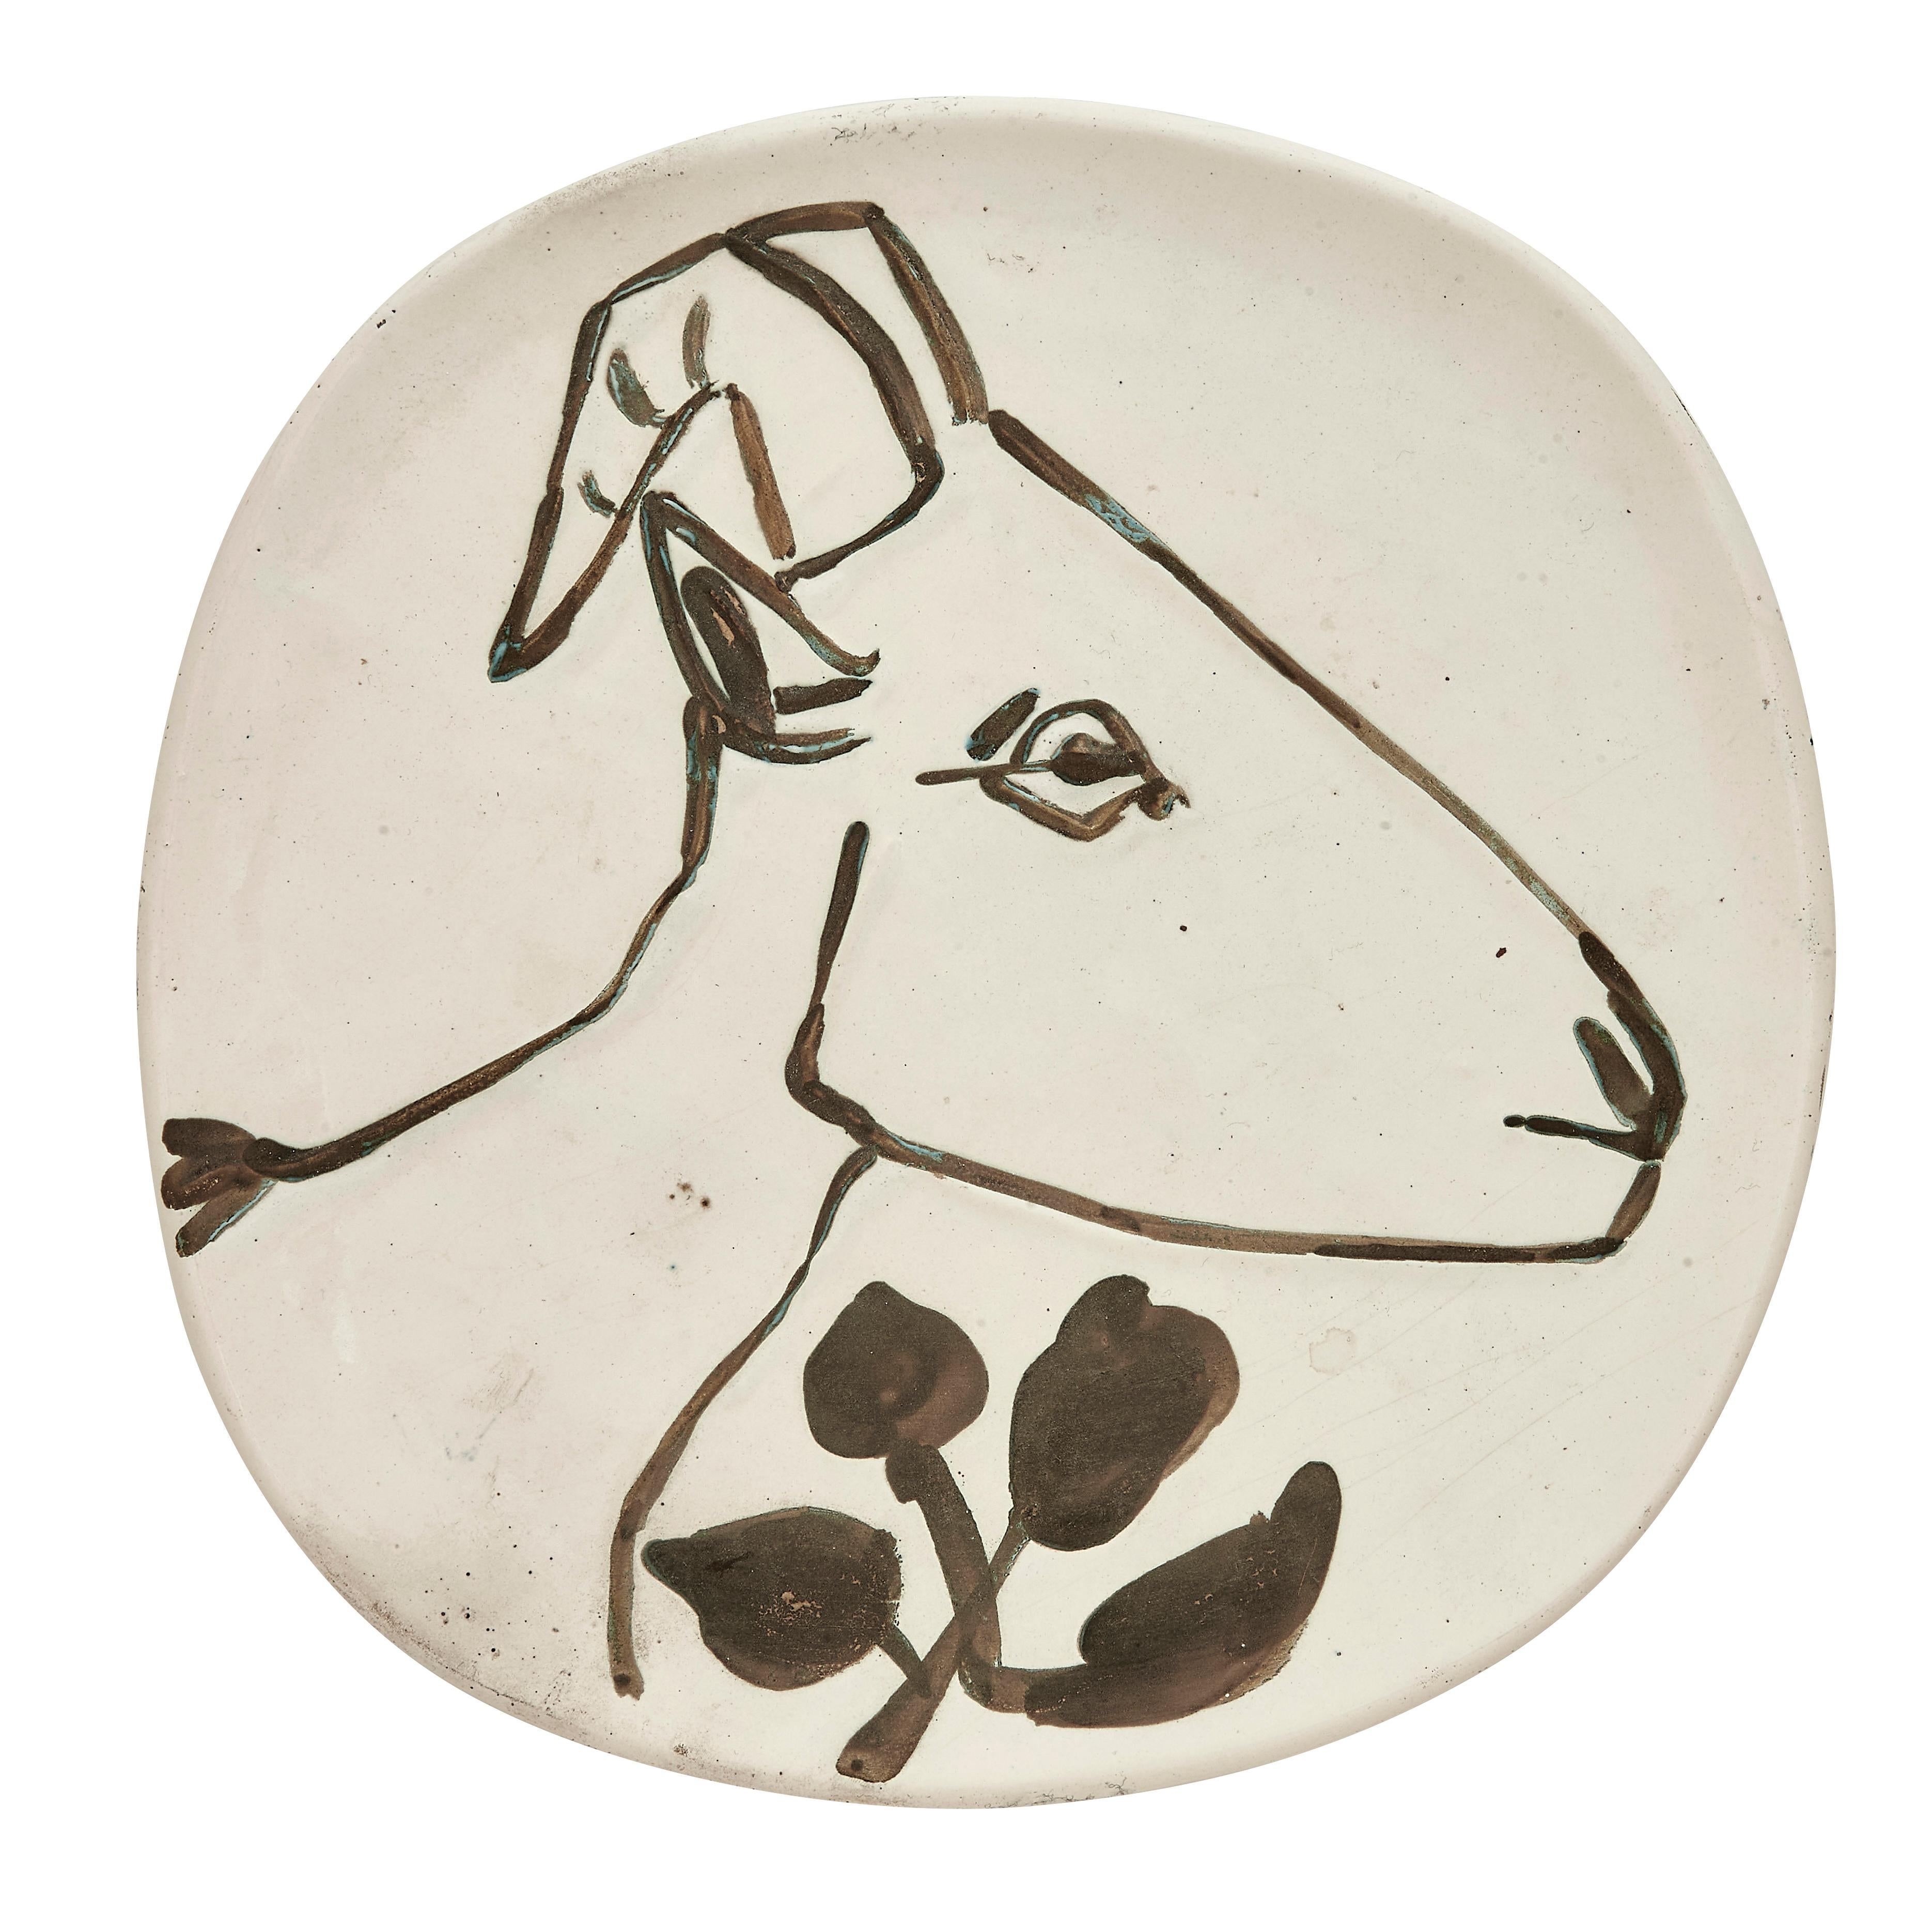 PABLO PICASSO (1881-1973) 
Tête de chèvre de profil (A. R. 106)

Terre de faïence plate, 1950, from the edition of 50, partially glazed and painted, with the Empreinte Originale de Picasso and Madoura stamps.